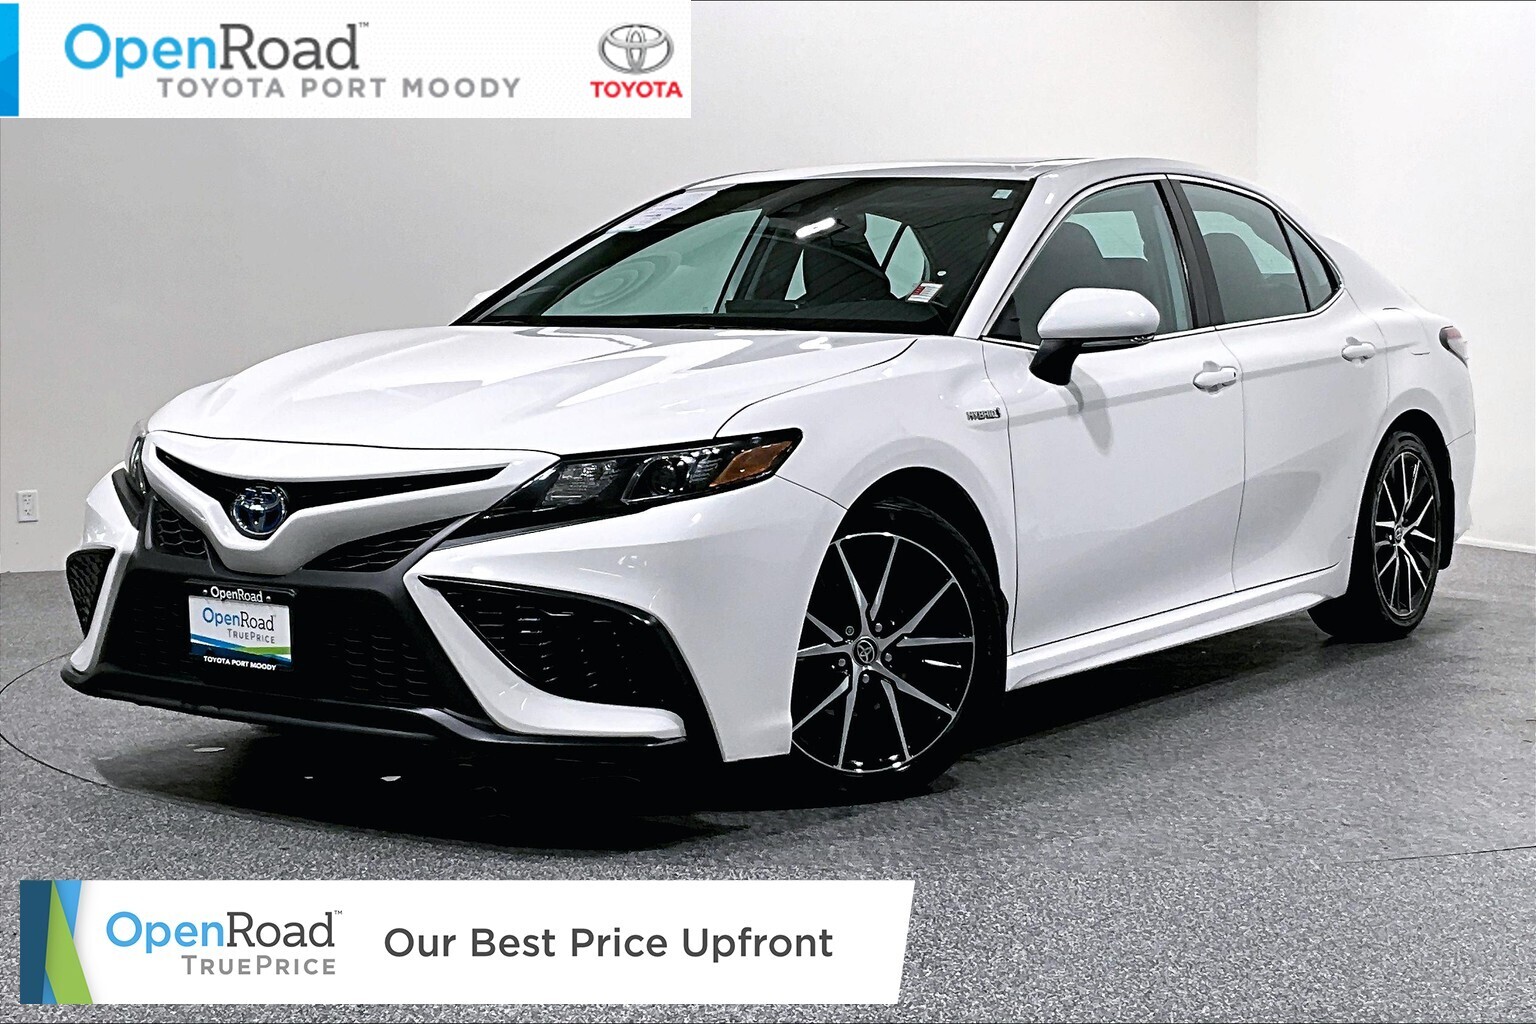 2021 Toyota Camry Hybrid SE |OpenRoad True Price |Local |One Owner |Full Se